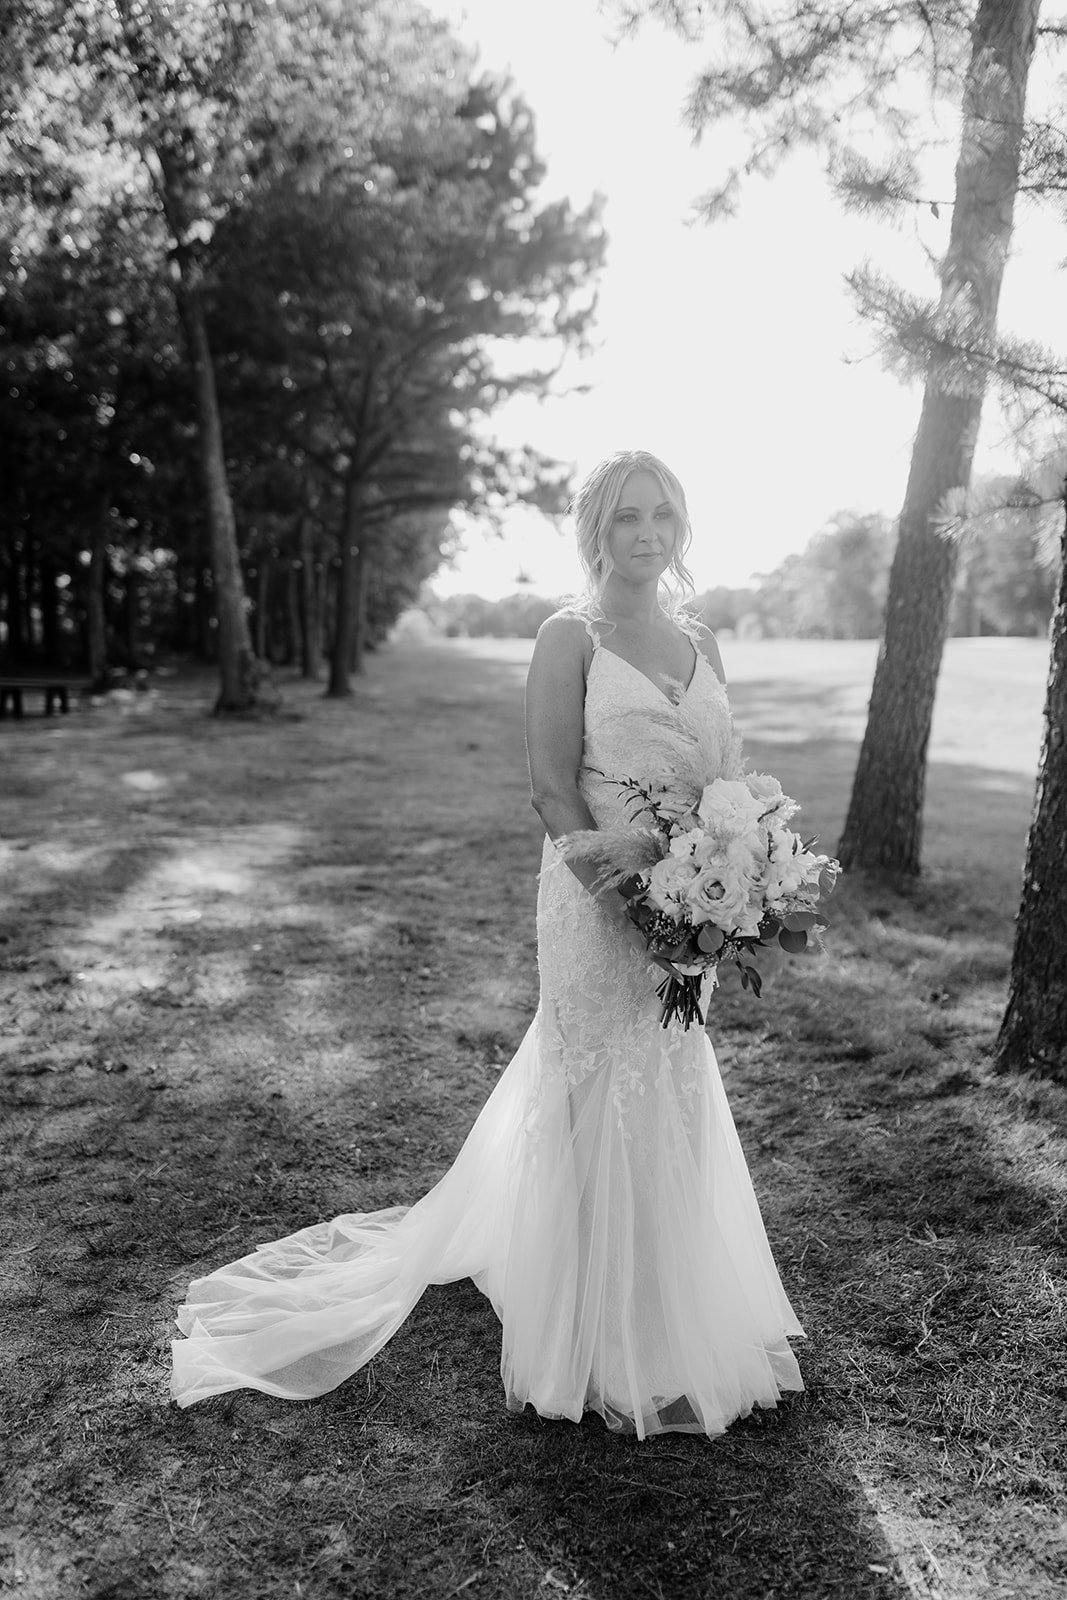 A Sophisticated New Jersey Wedding At Blue Heron Pines Golf Course